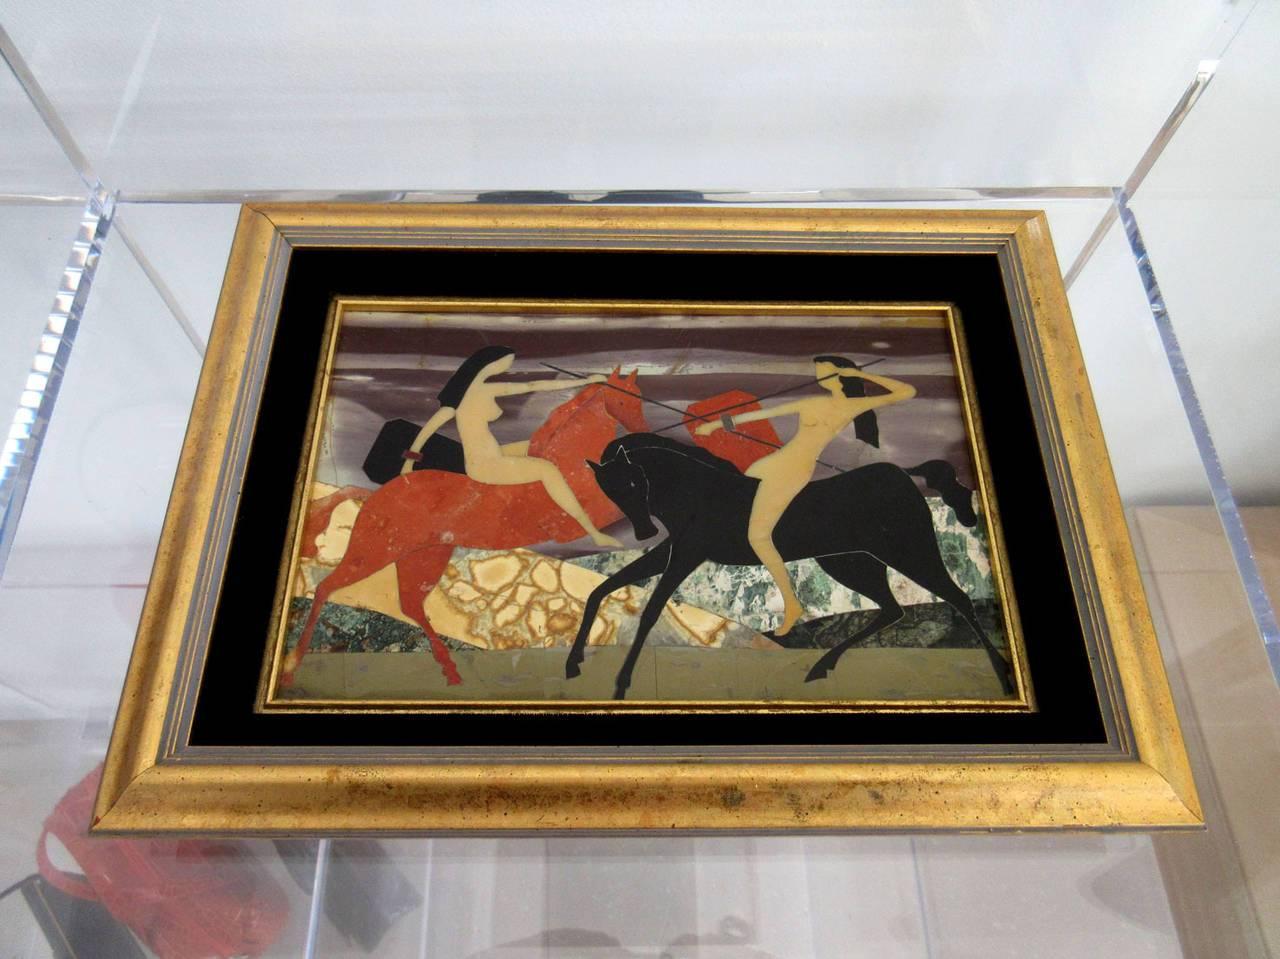 Vintage modernist Pietra Dura depicting female nude warriors on horseback. Dynamic composition, masterfully inlaid stone work.